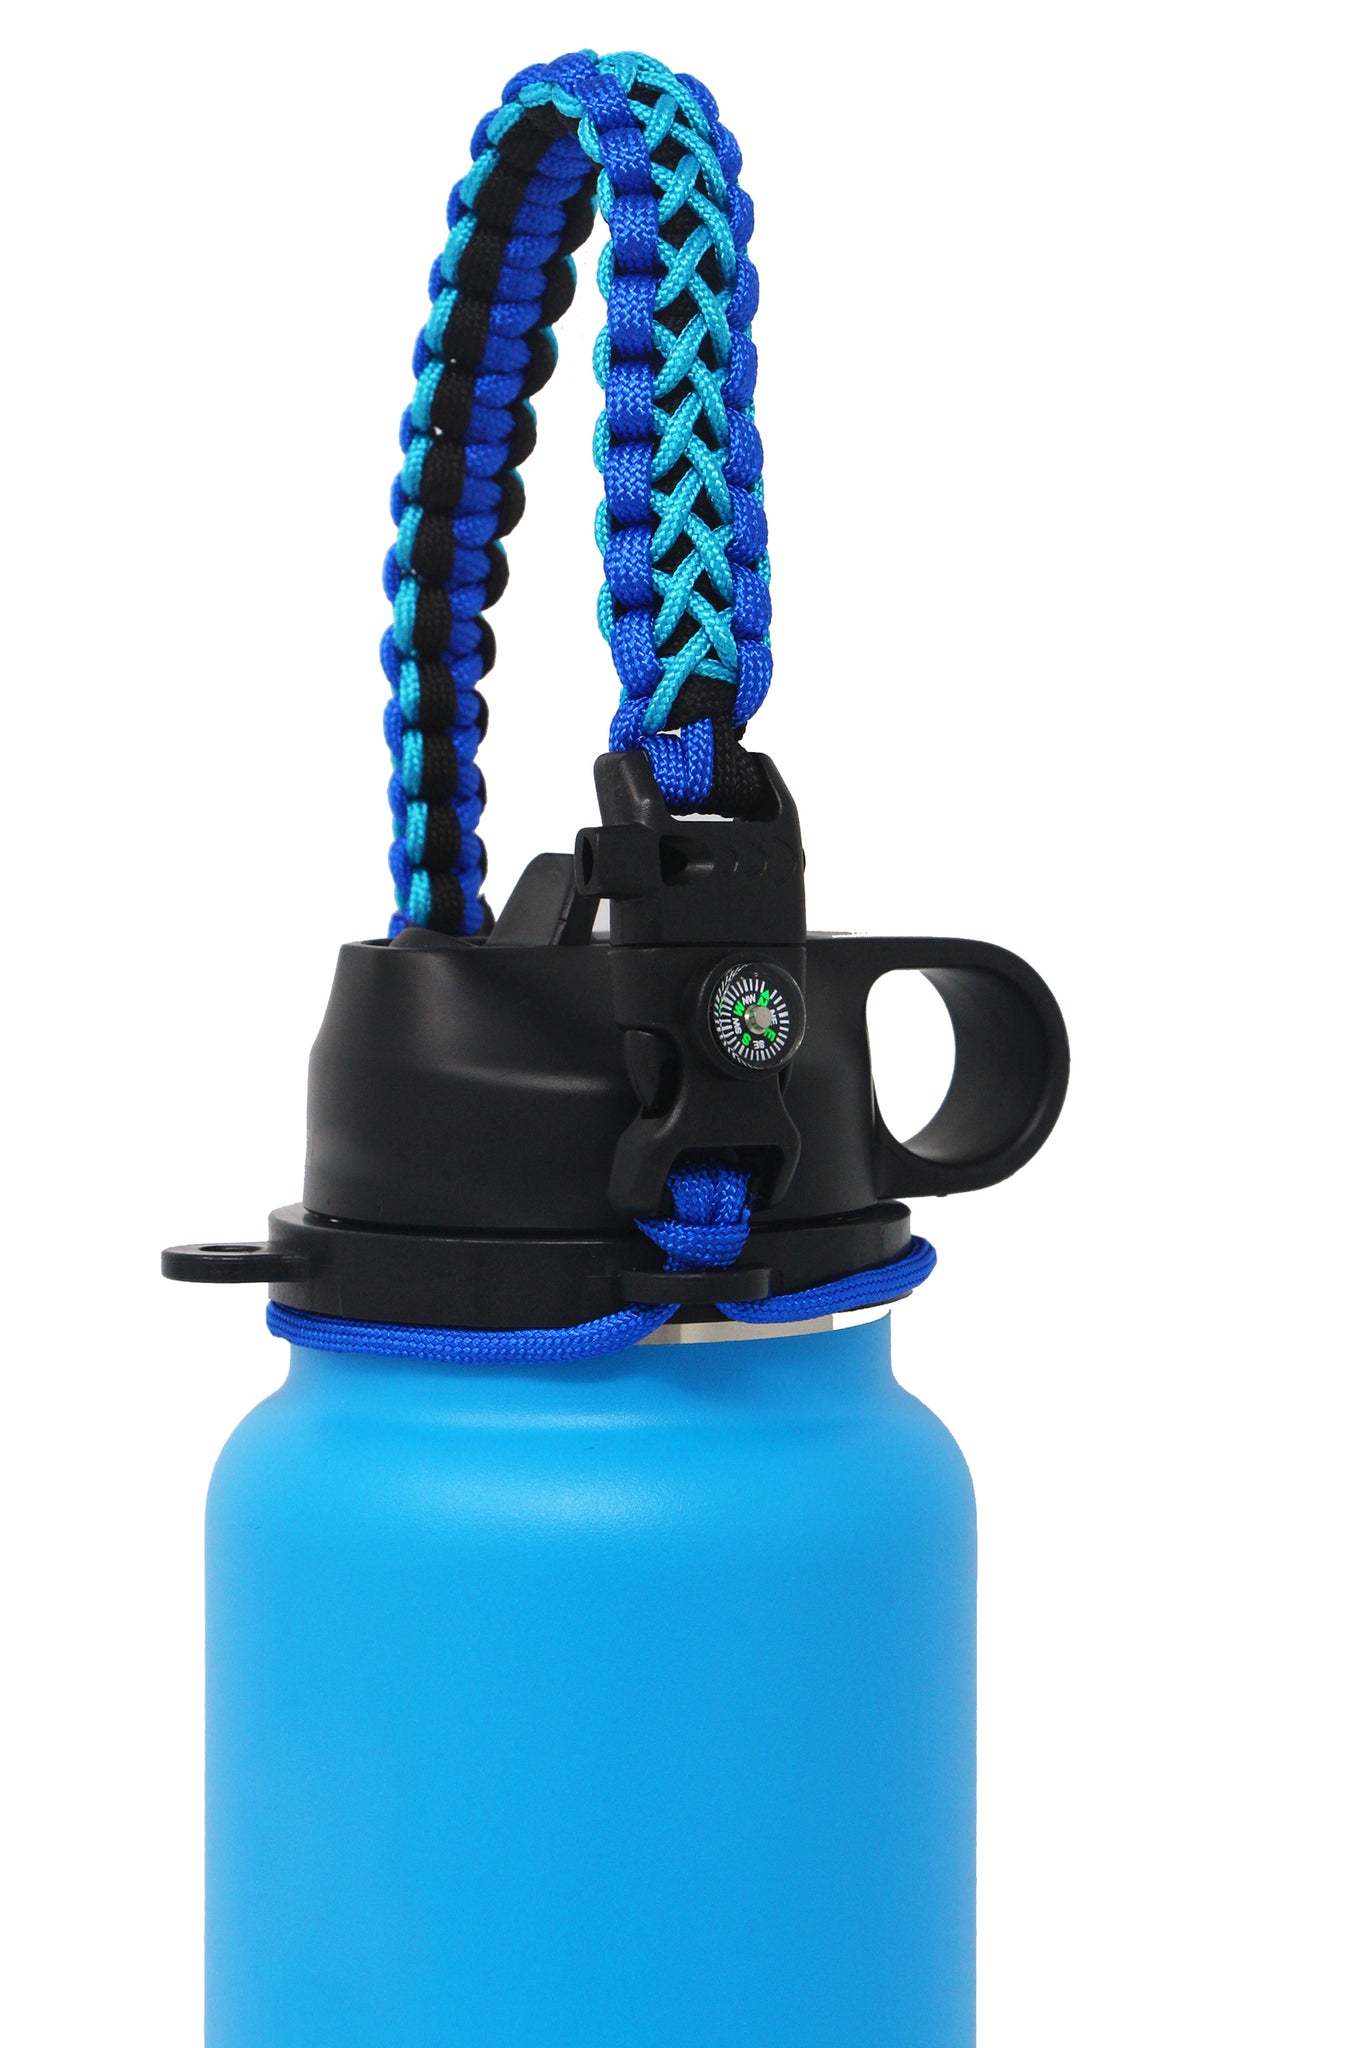 QeeCord 2.0 Paracord Handle for Hydroflask 2.0 Wide & Standard Mouth Water  Bottles Strap Carrier with New Safety Ring Holder, 12oz - 64oz